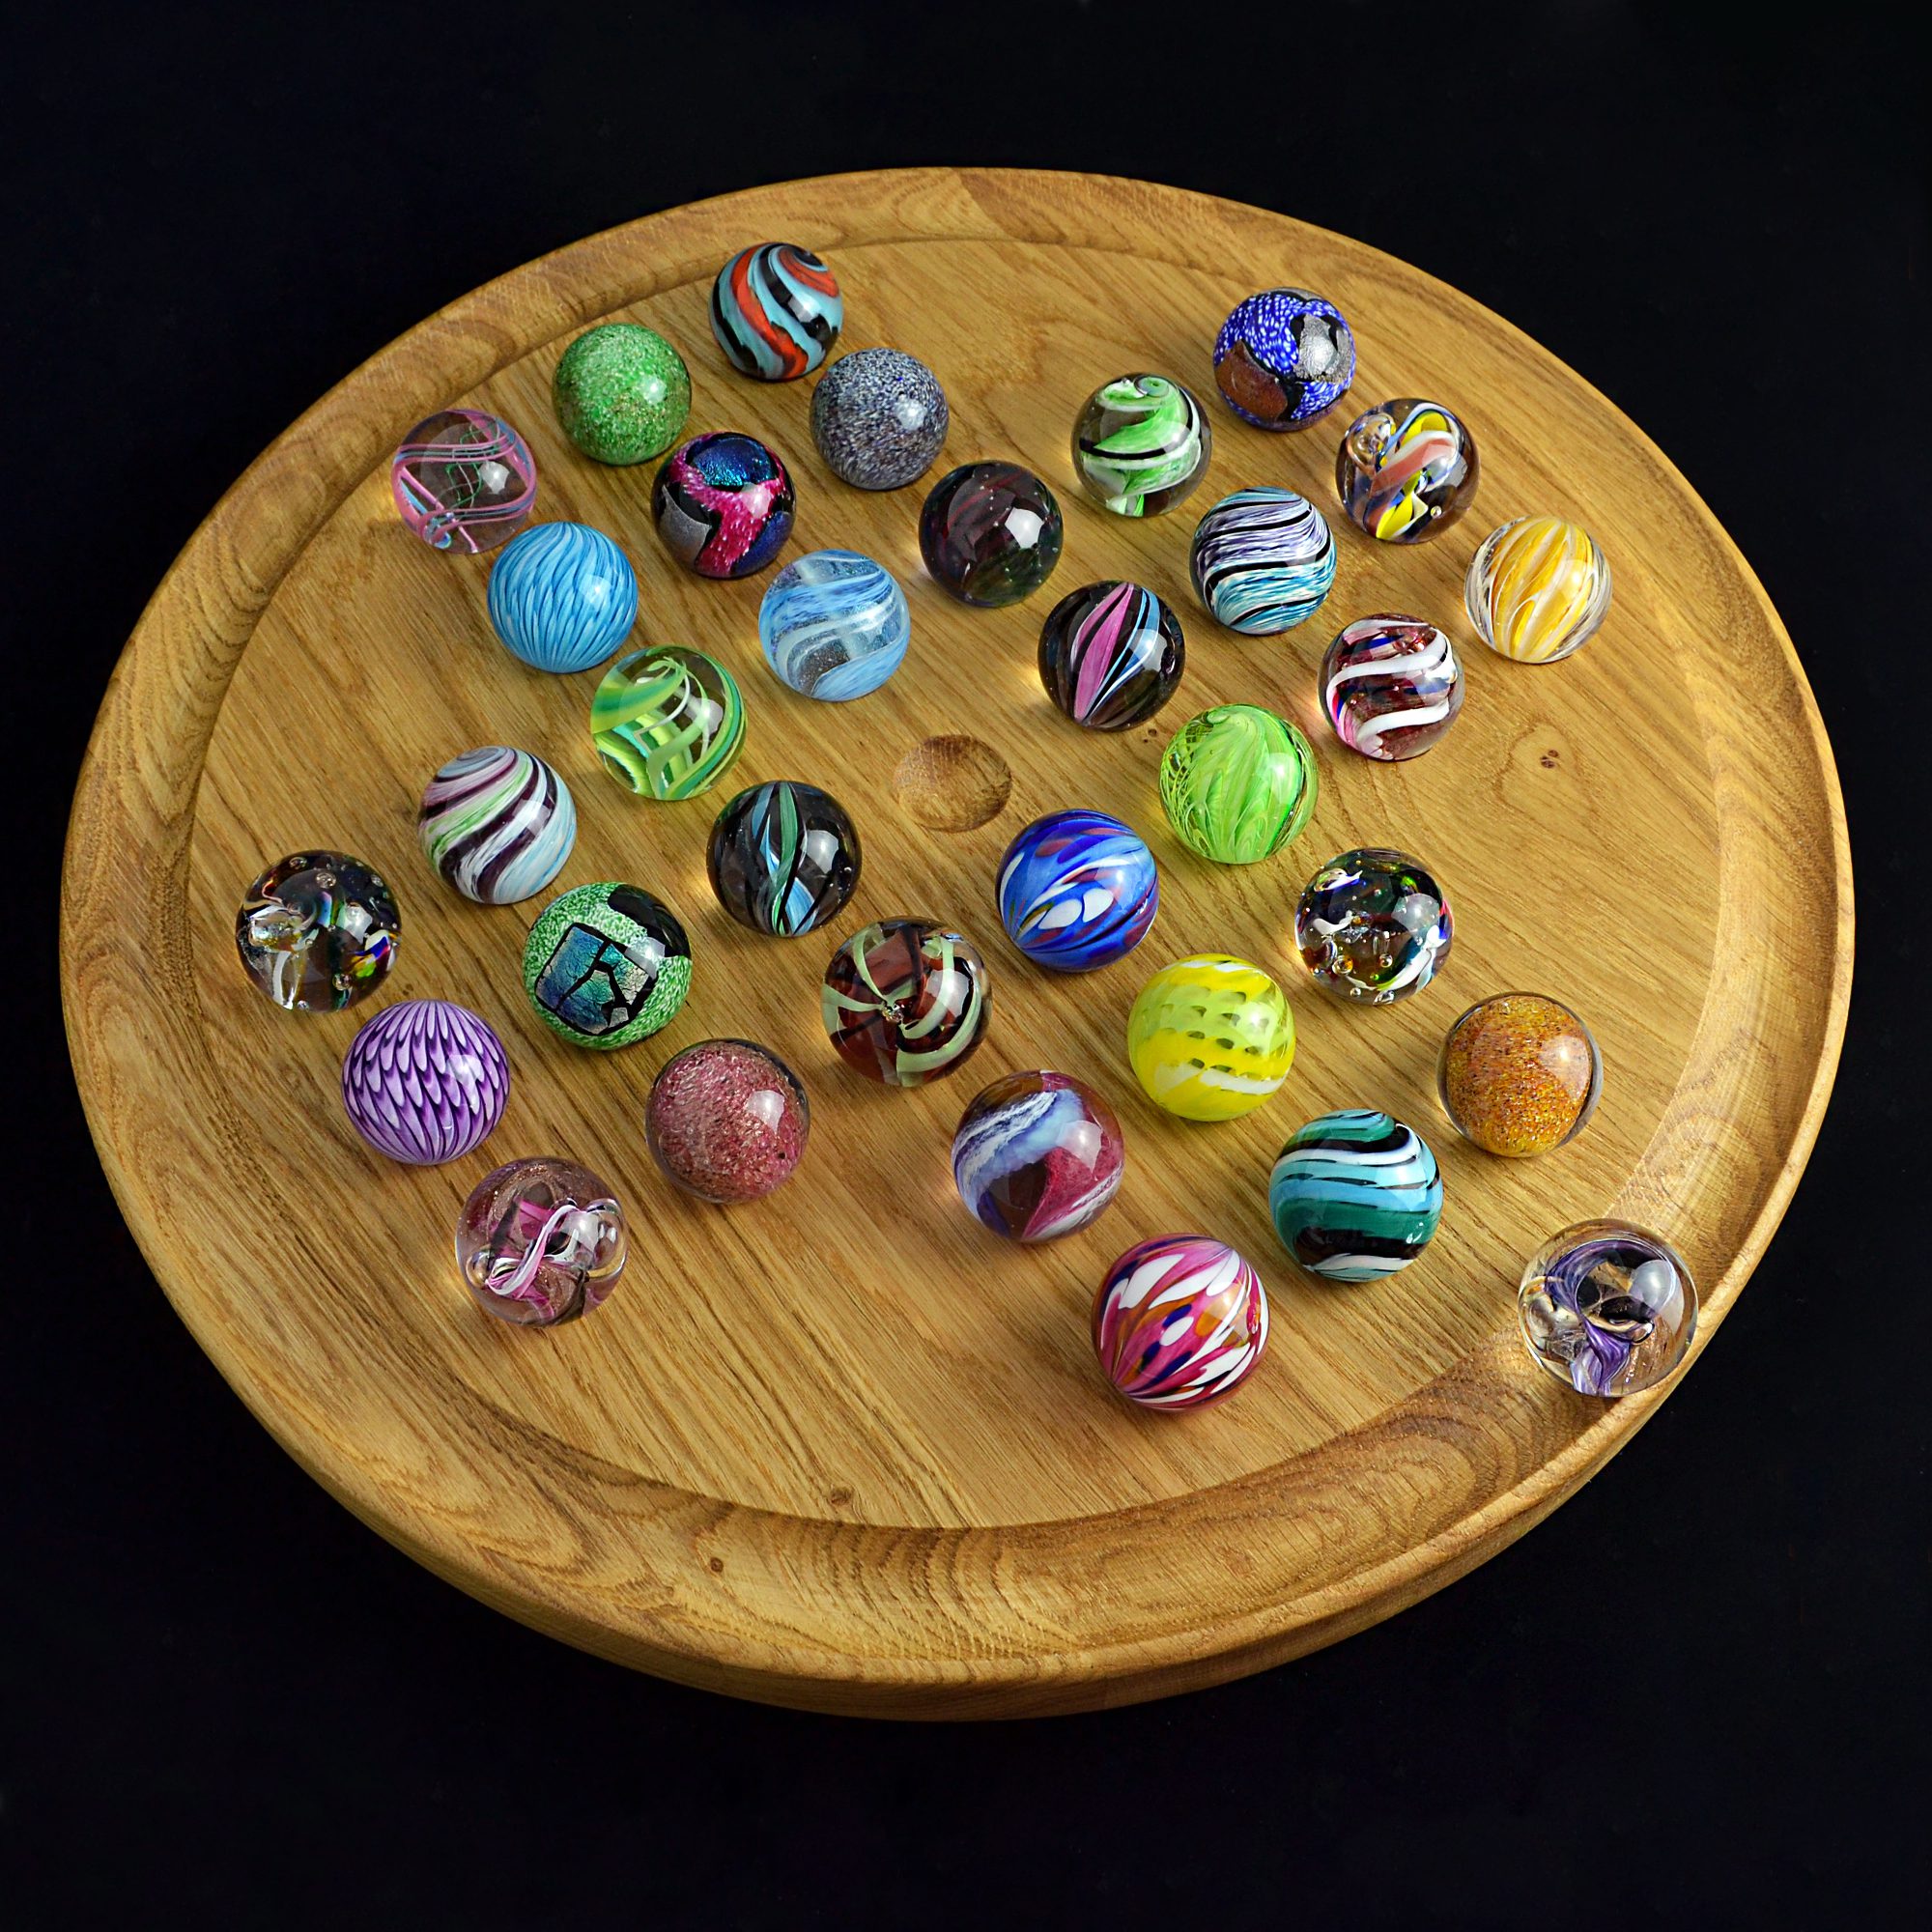 Collectable Handmade Solitaire Board & Marble Set - House of Marbles US